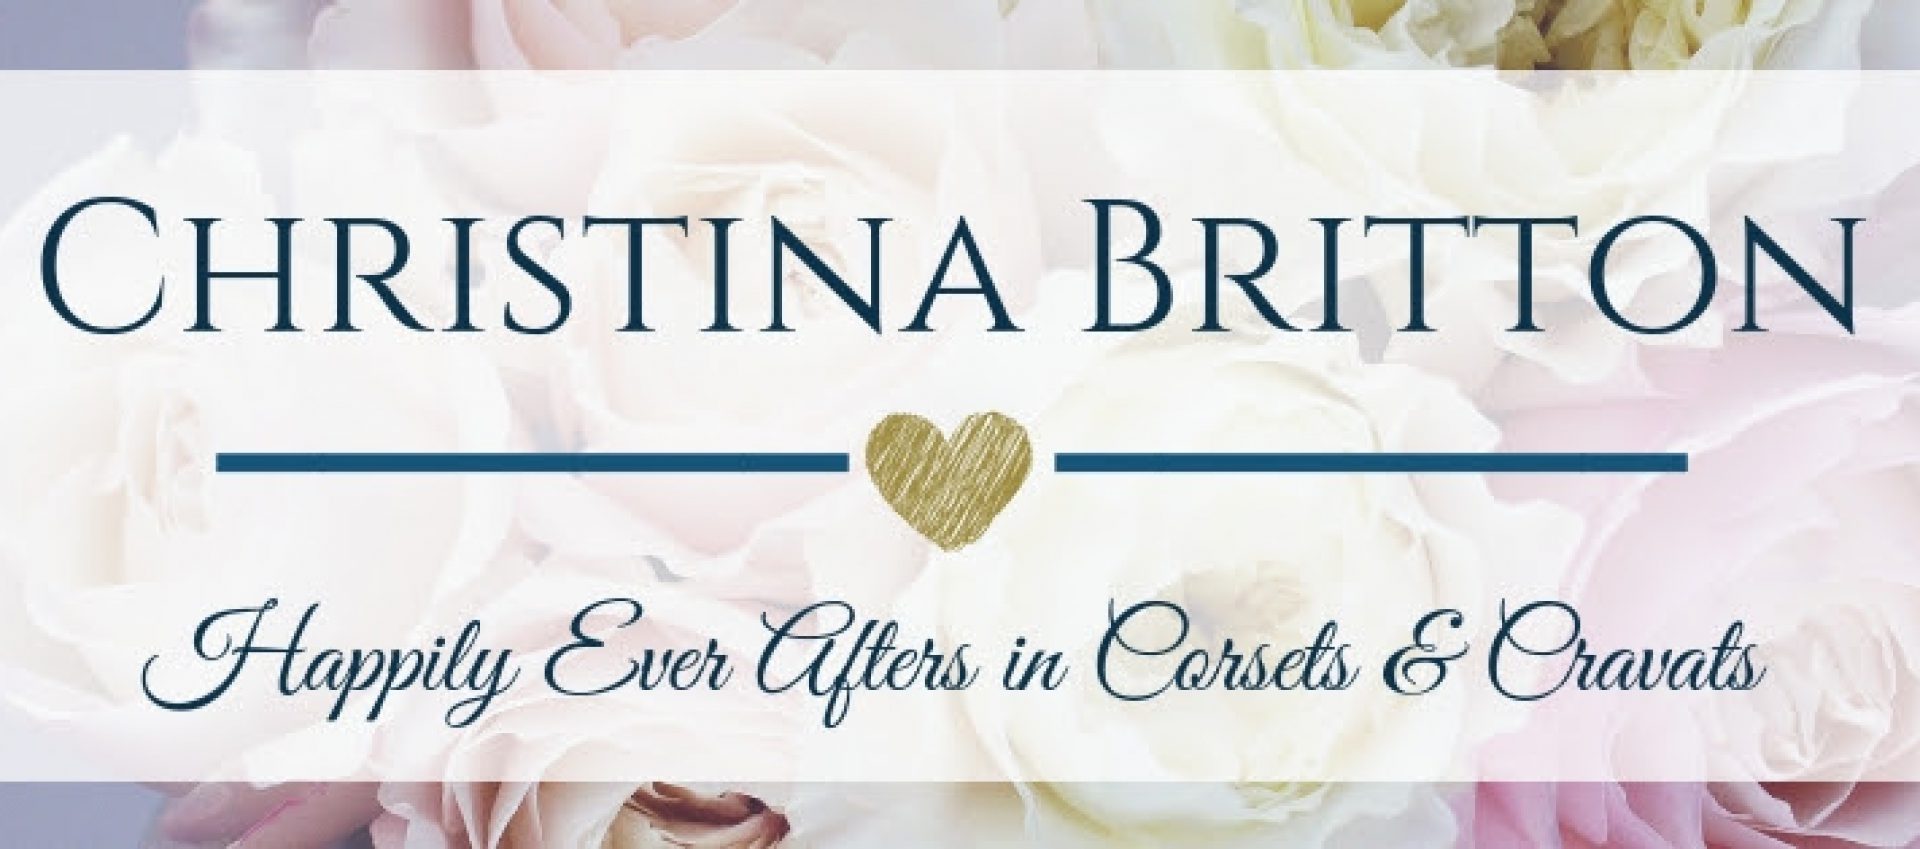 With Love in Sight by Christina Britton